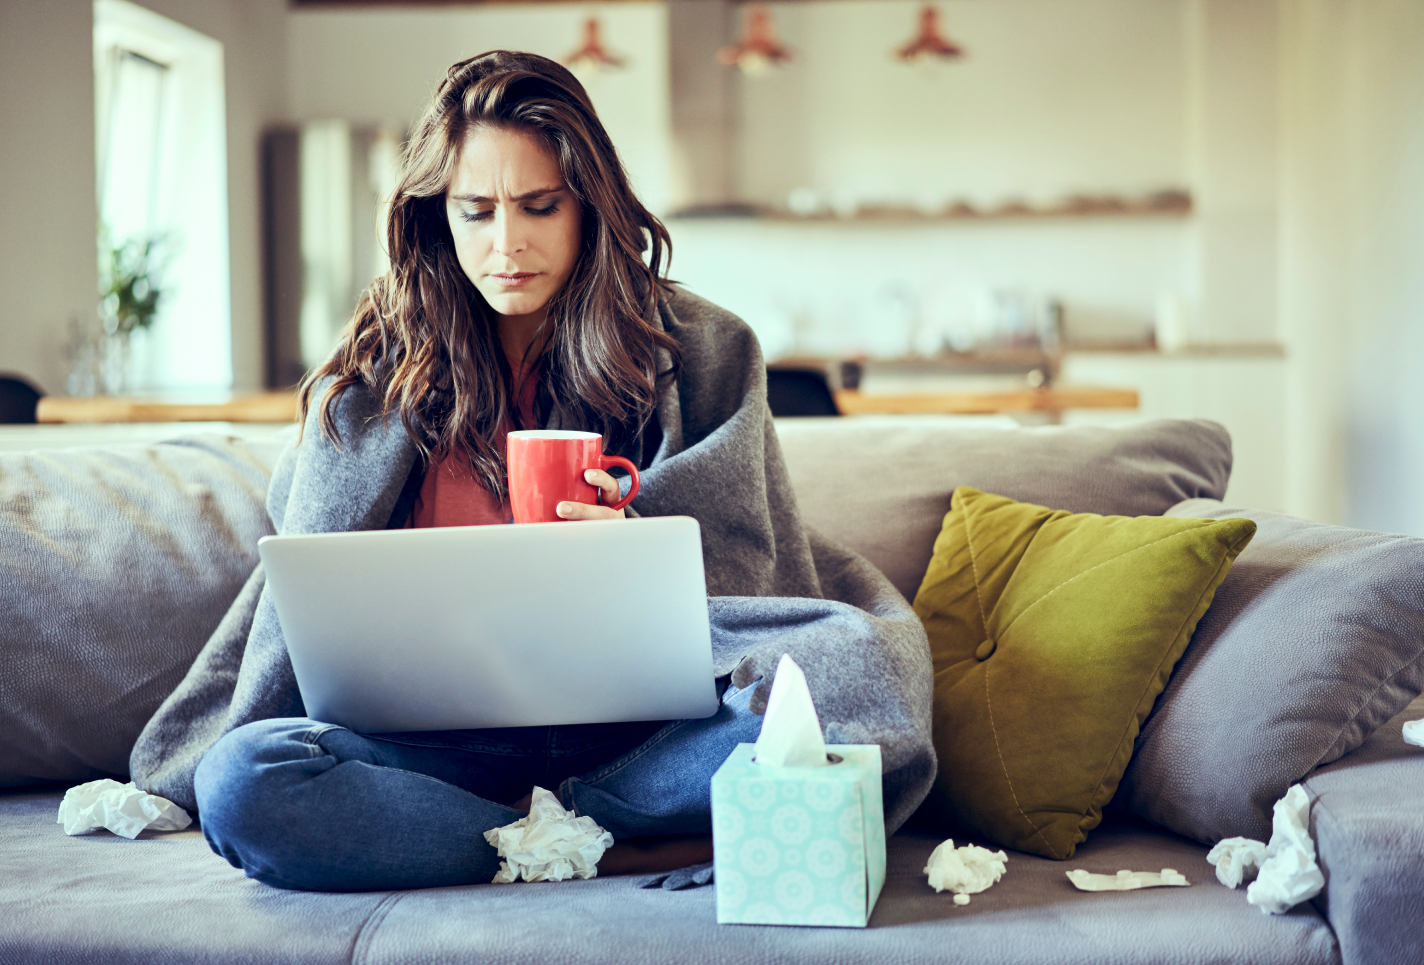 Sick woman sitting on a couch browsing on her laptop